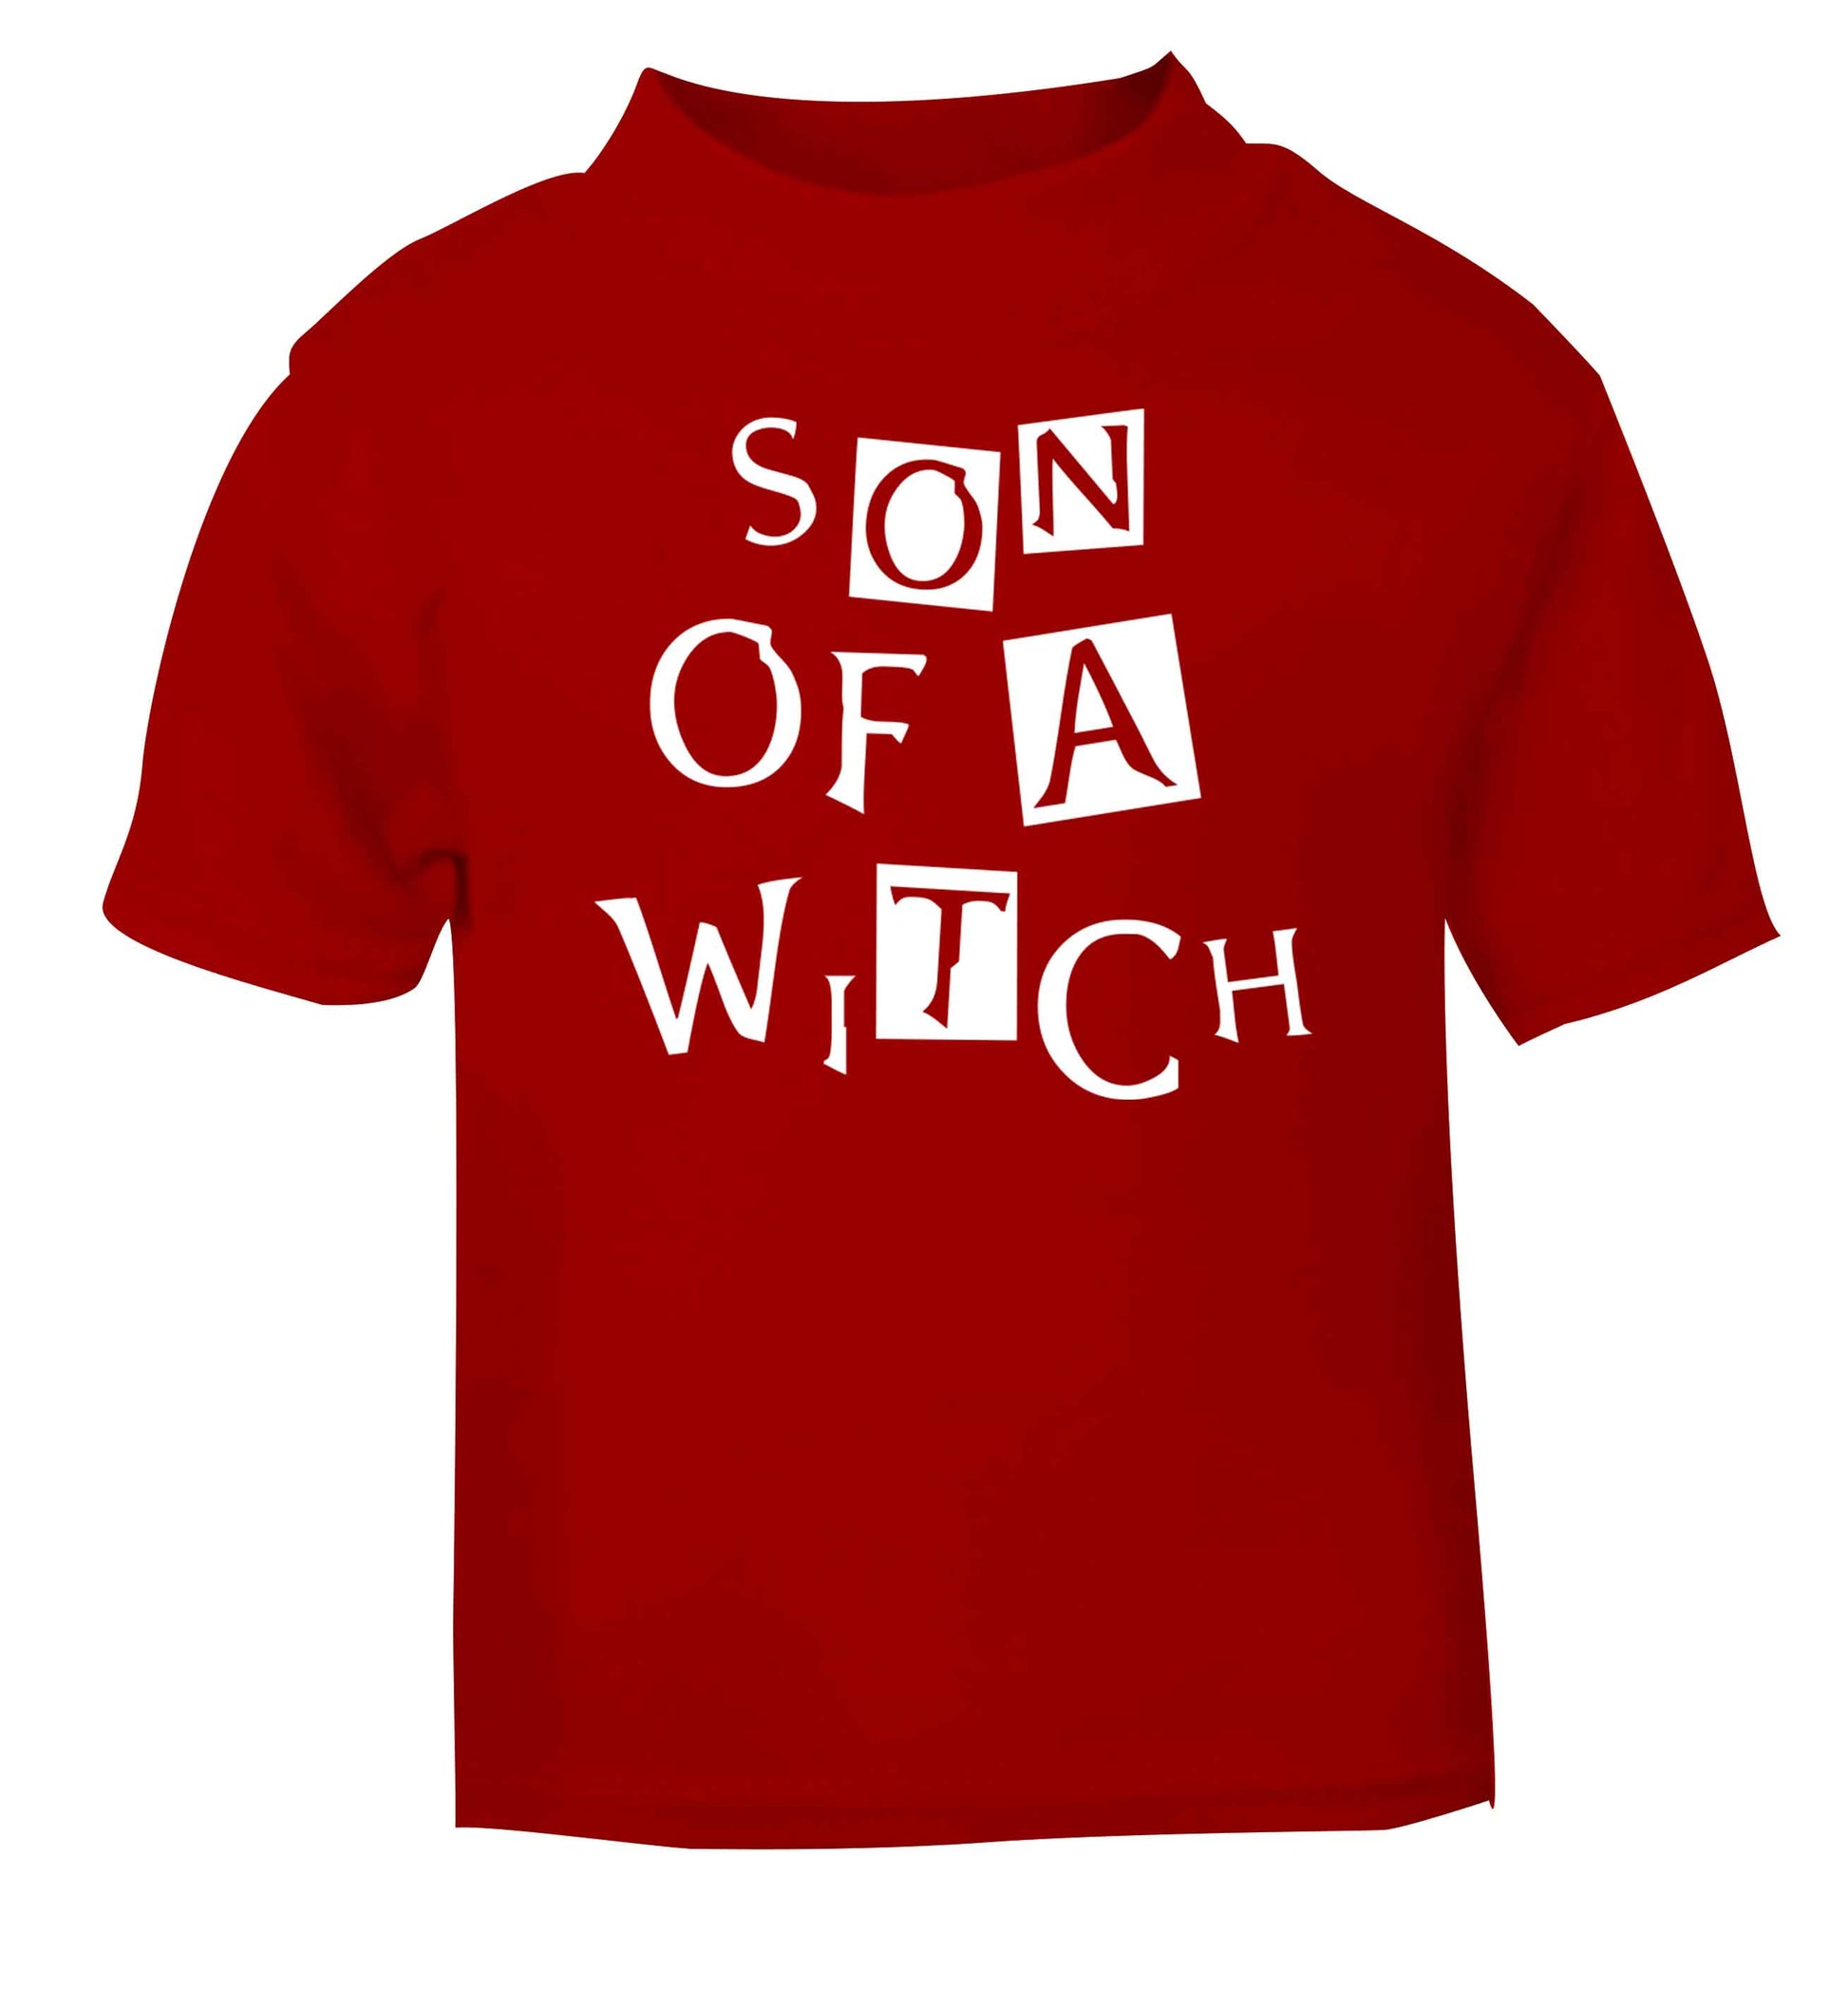 Son of a witch red baby toddler Tshirt 2 Years